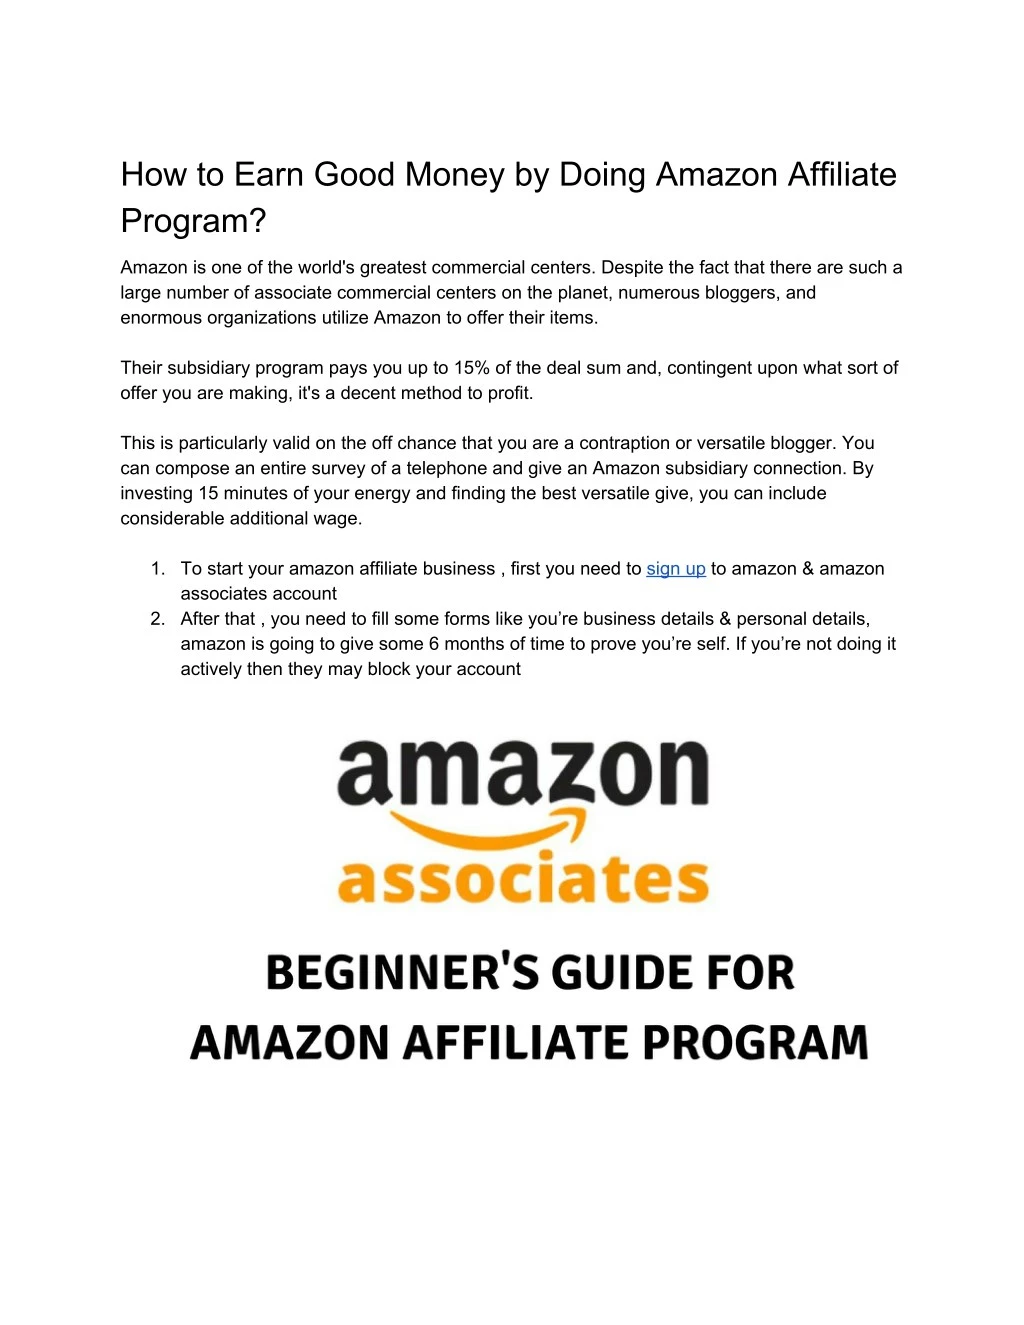 how to earn good money by doing amazon affiliate